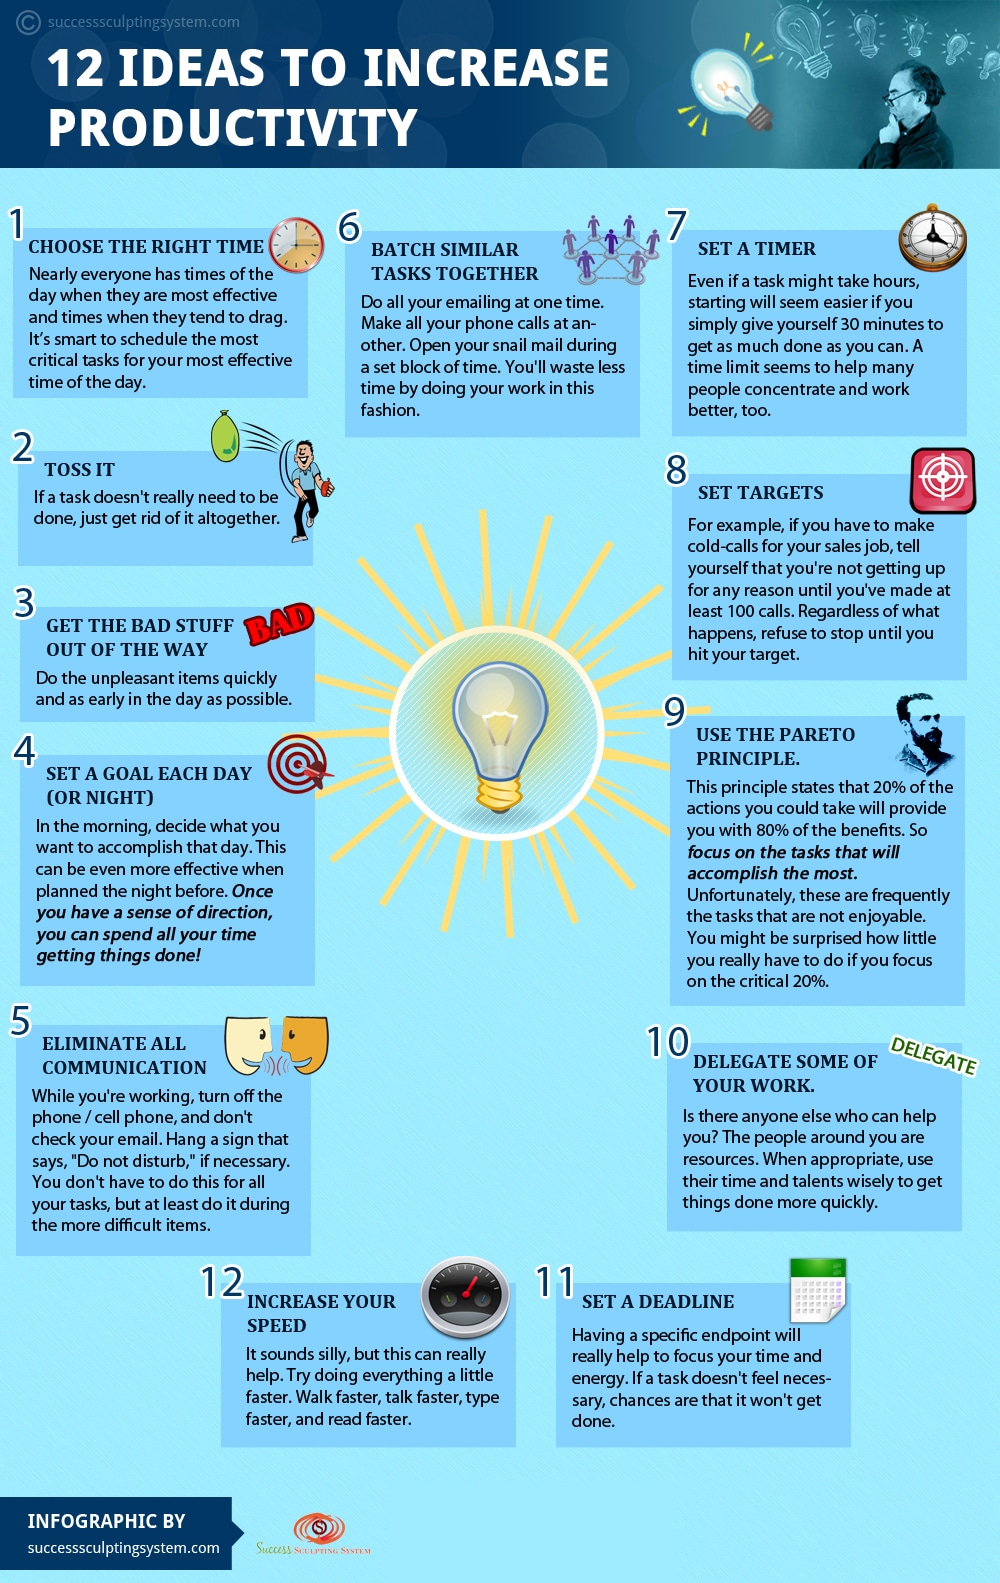 increase-productivity-tips-guide-infographic